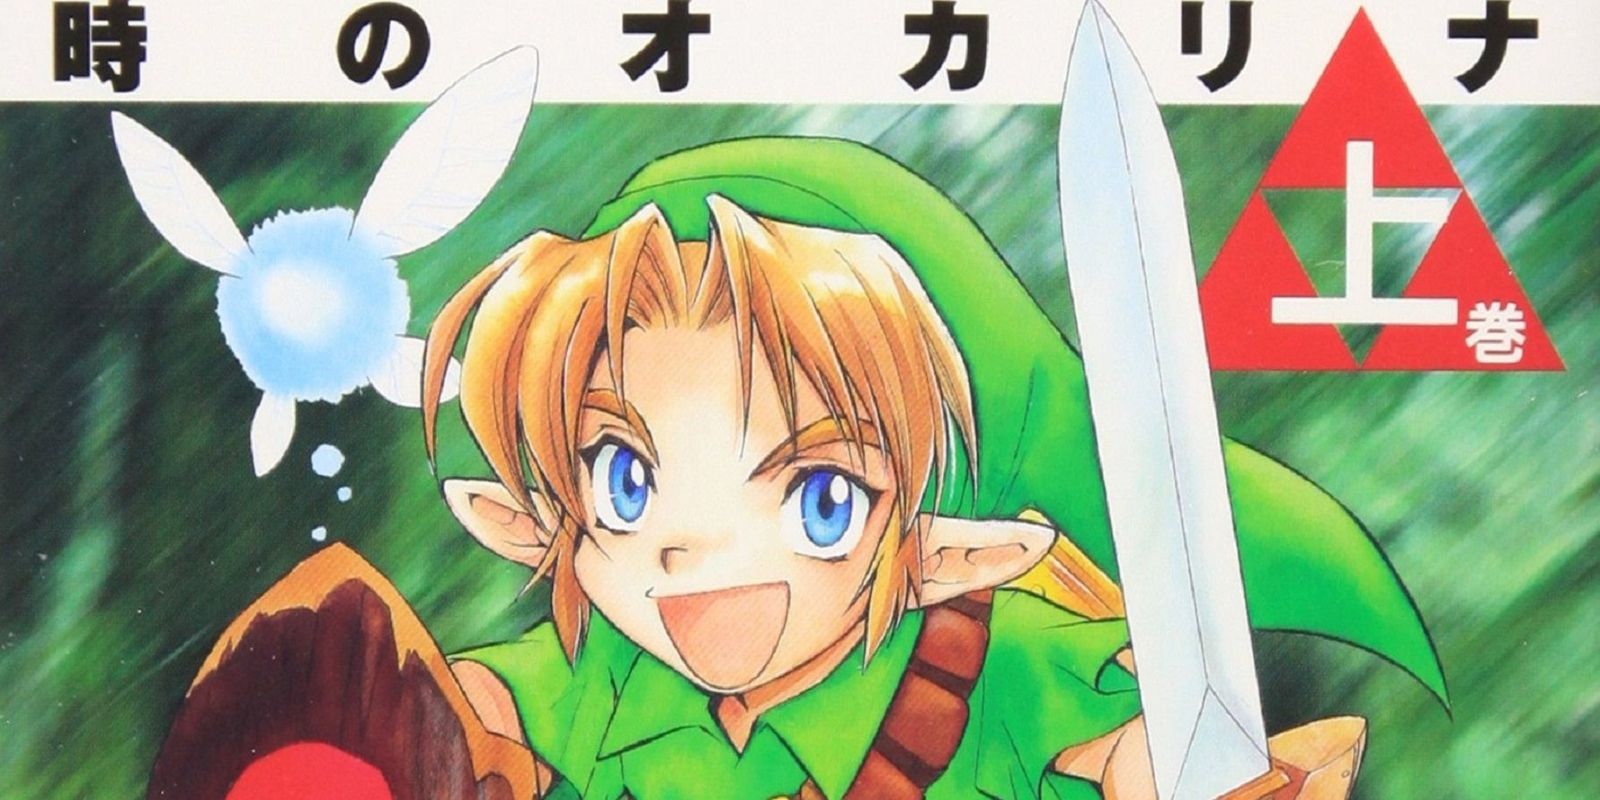 LINK SPEAKS IN THIS?! Opening the Ocarina of Time Legendary Edition Manga 